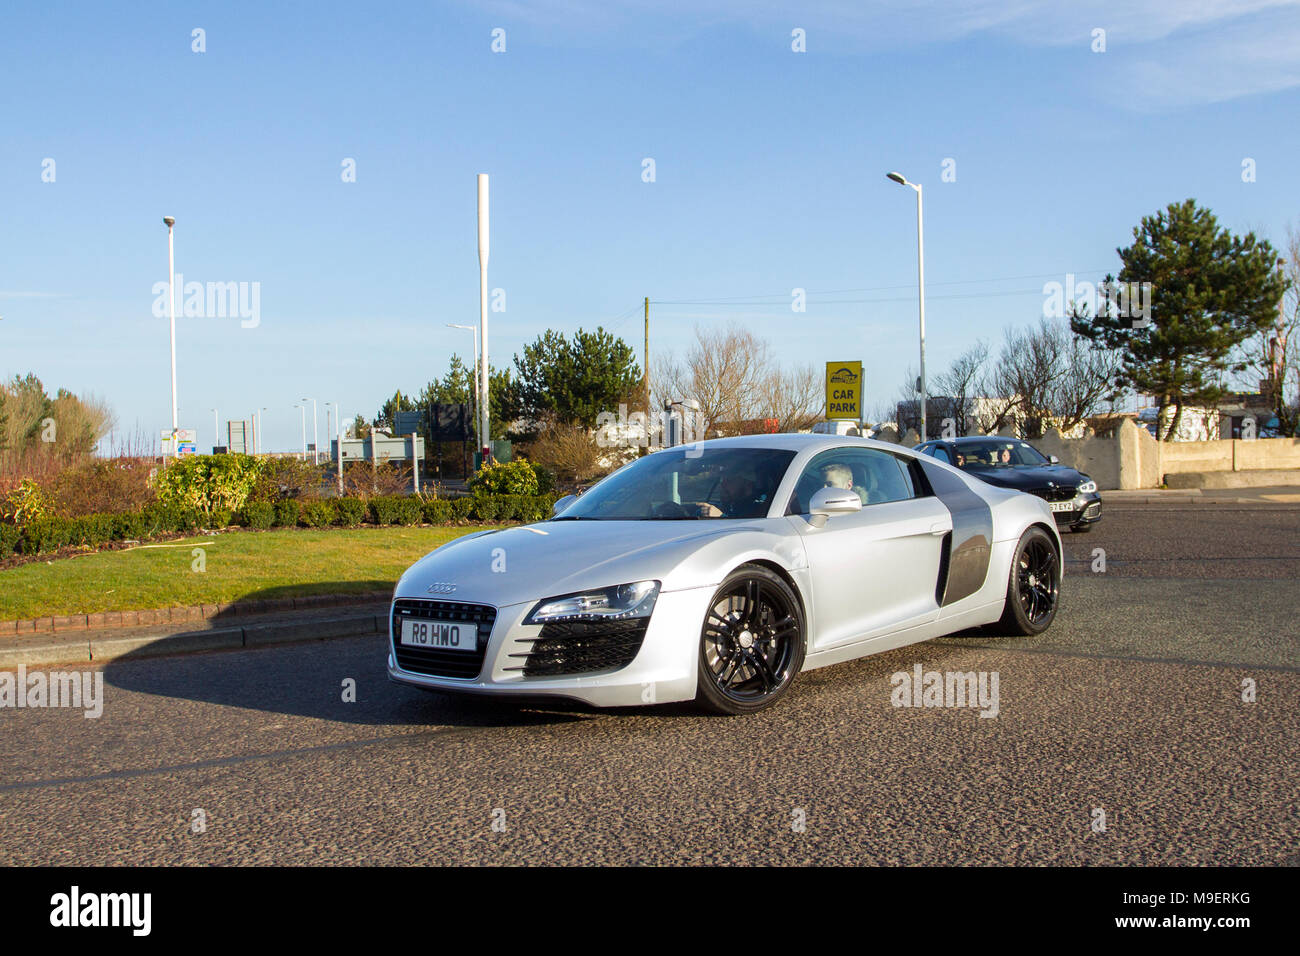 2008 silver Audi R8 4.2 Quattro S-A 4163cc petrol coupe at the North-West Supercar event as cars and tourists arrive in the coastal resort. Cars are bumper to bumper on the seafront esplanade as classic & sports car enthusiasts take advantage of warm weather for a motoring day out. Stock Photo